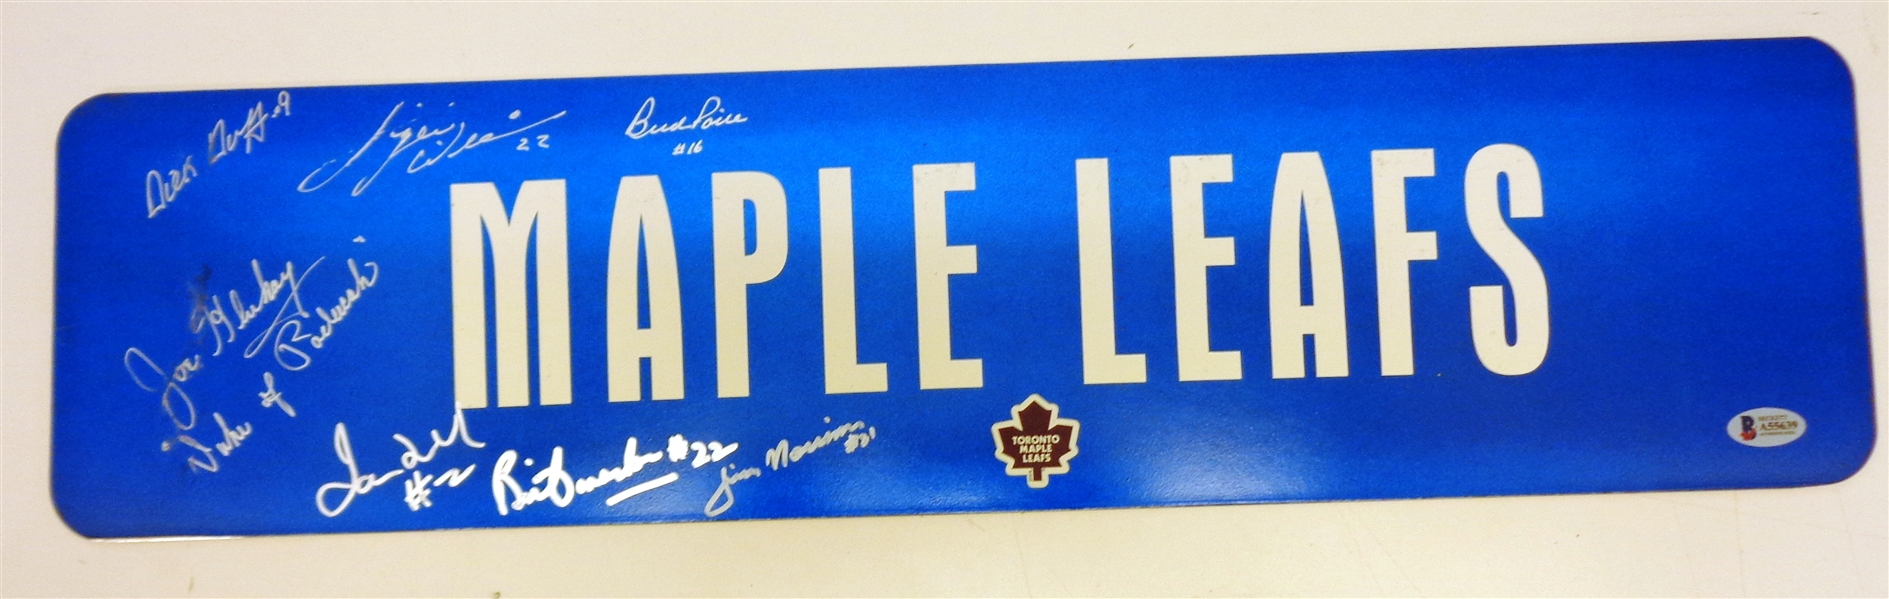 Toronto Maple Leafs 6x24 Metal Sign Autographed by 8